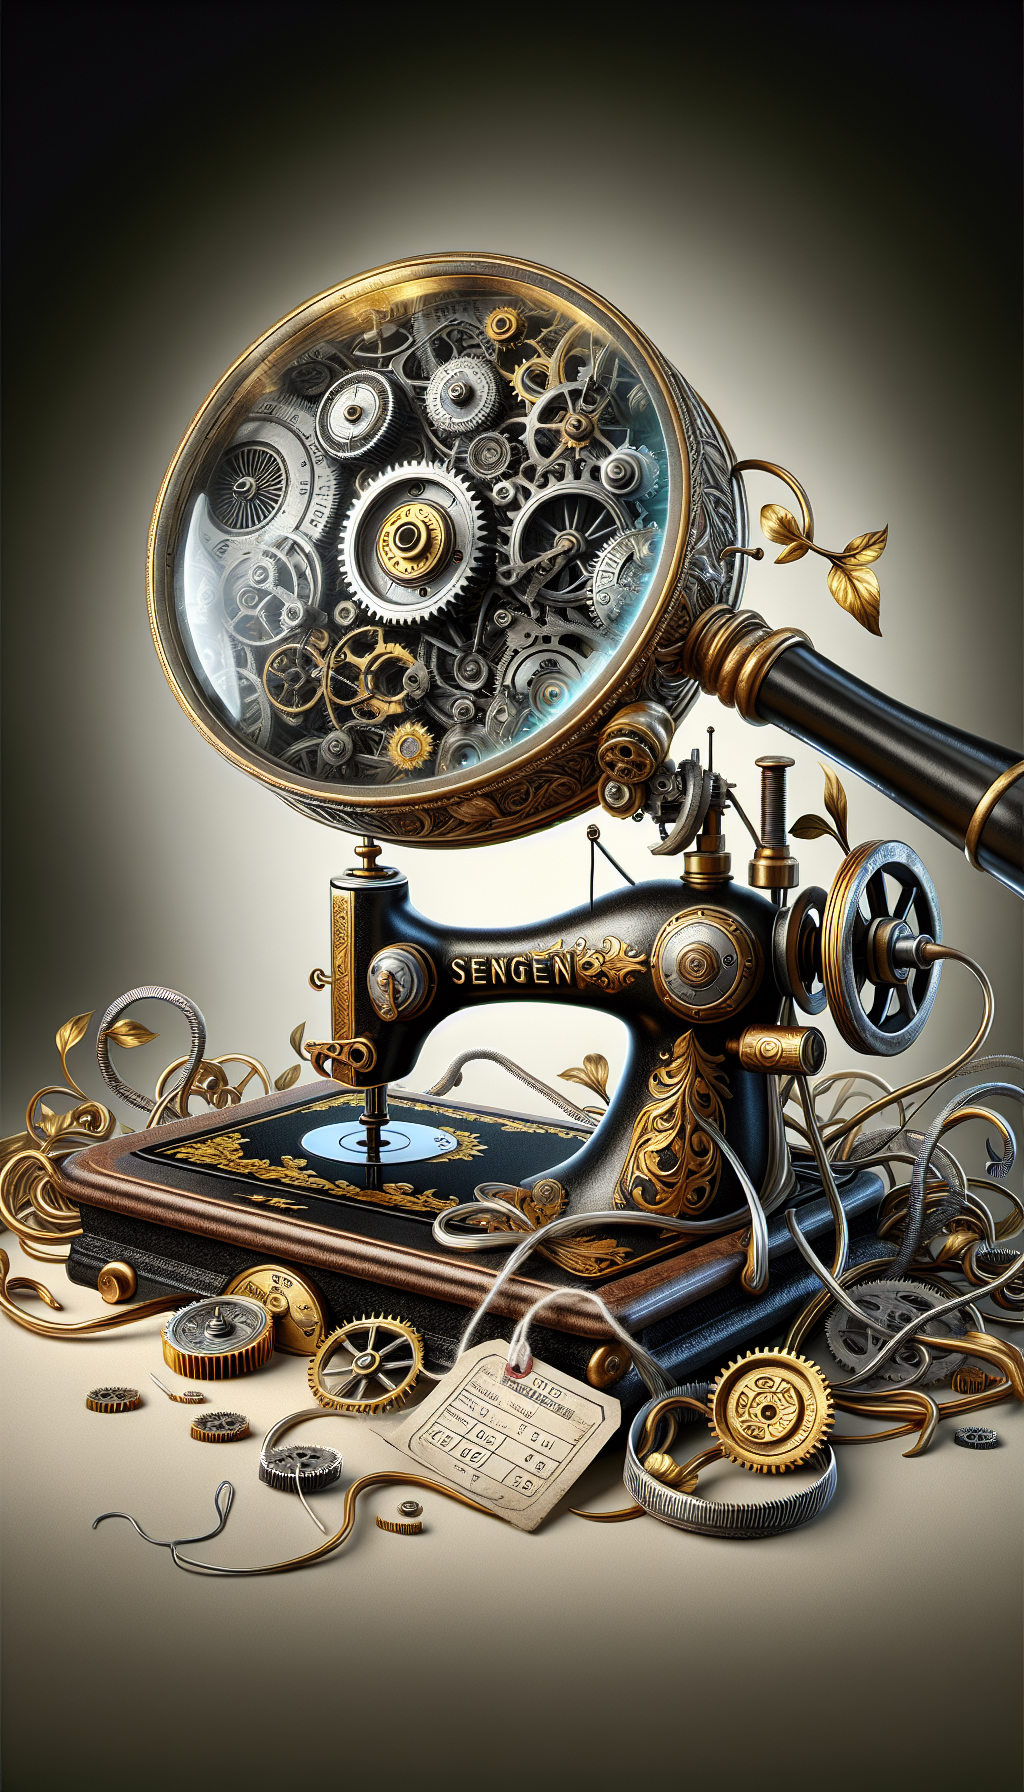 An illustration showcases a whimsical steampunk magnifying glass hovering over a classic Singer sewing machine, revealing cogs with embossed date marks. The machine's base entwines with a price tag displaying a hefty sum while intricate vines of gold and silver thread—symbolizing value—twist around the frame, fusing nostalgia with the allure of treasured antiques.